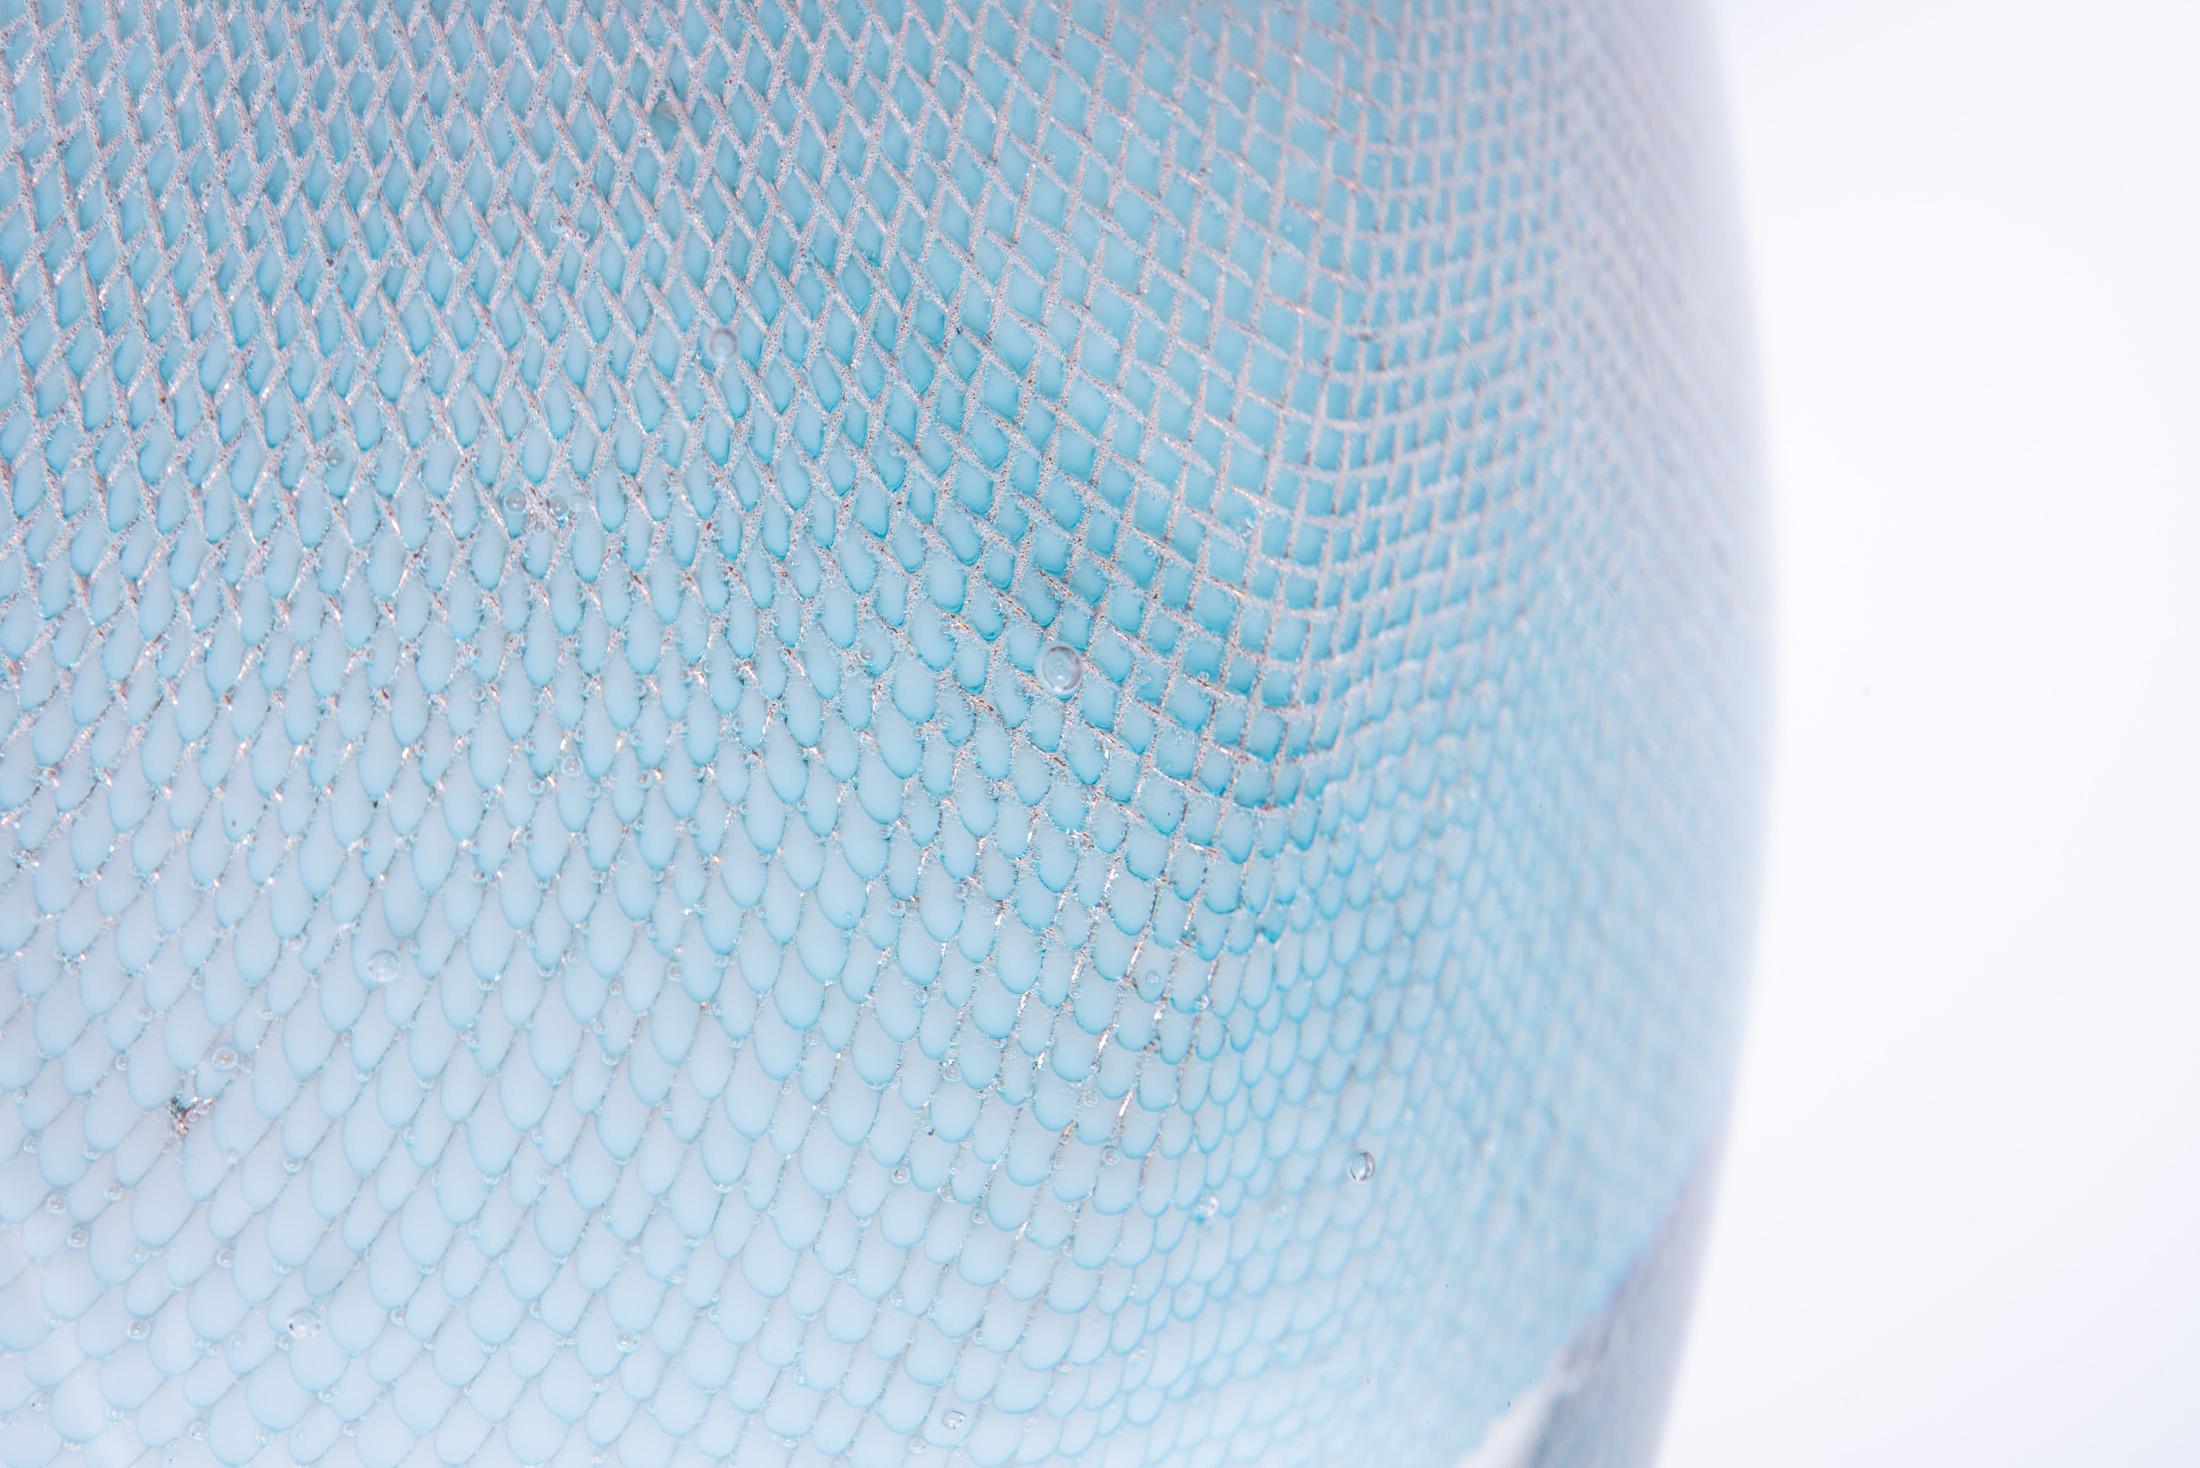 Glass and Copper Mesh Vase by Omer Arbel for OAO Works, Light Blue In New Condition For Sale In Vancouver, British Columbia